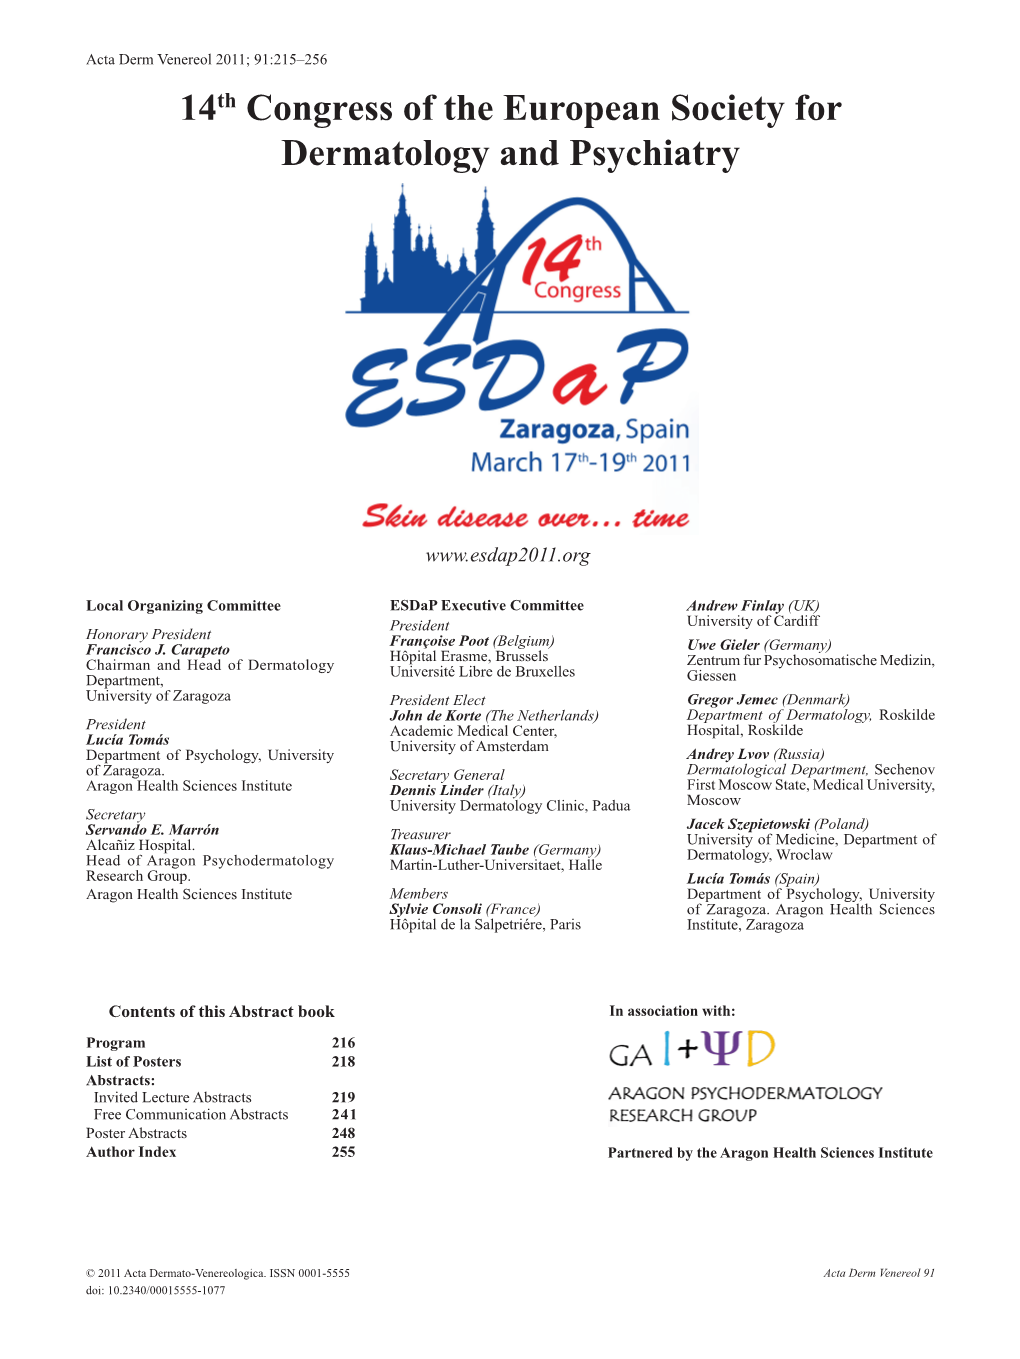 14Th Congress of the European Society for Dermatology and Psychiatry